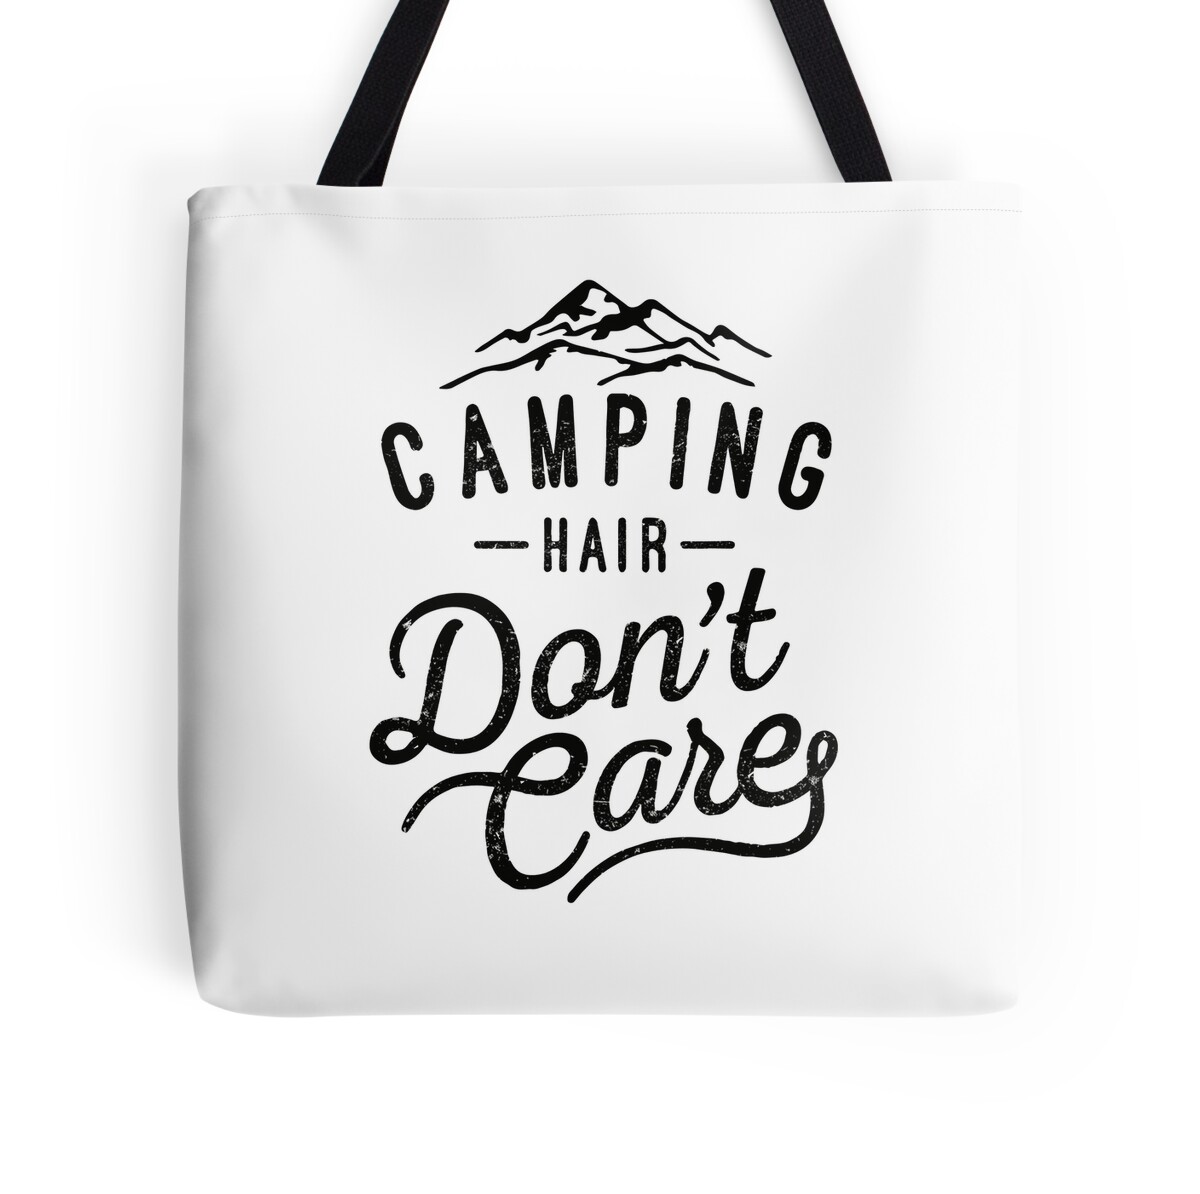 Download "Camping Hair Don't Care" Tote Bags by beatdesigns | Redbubble